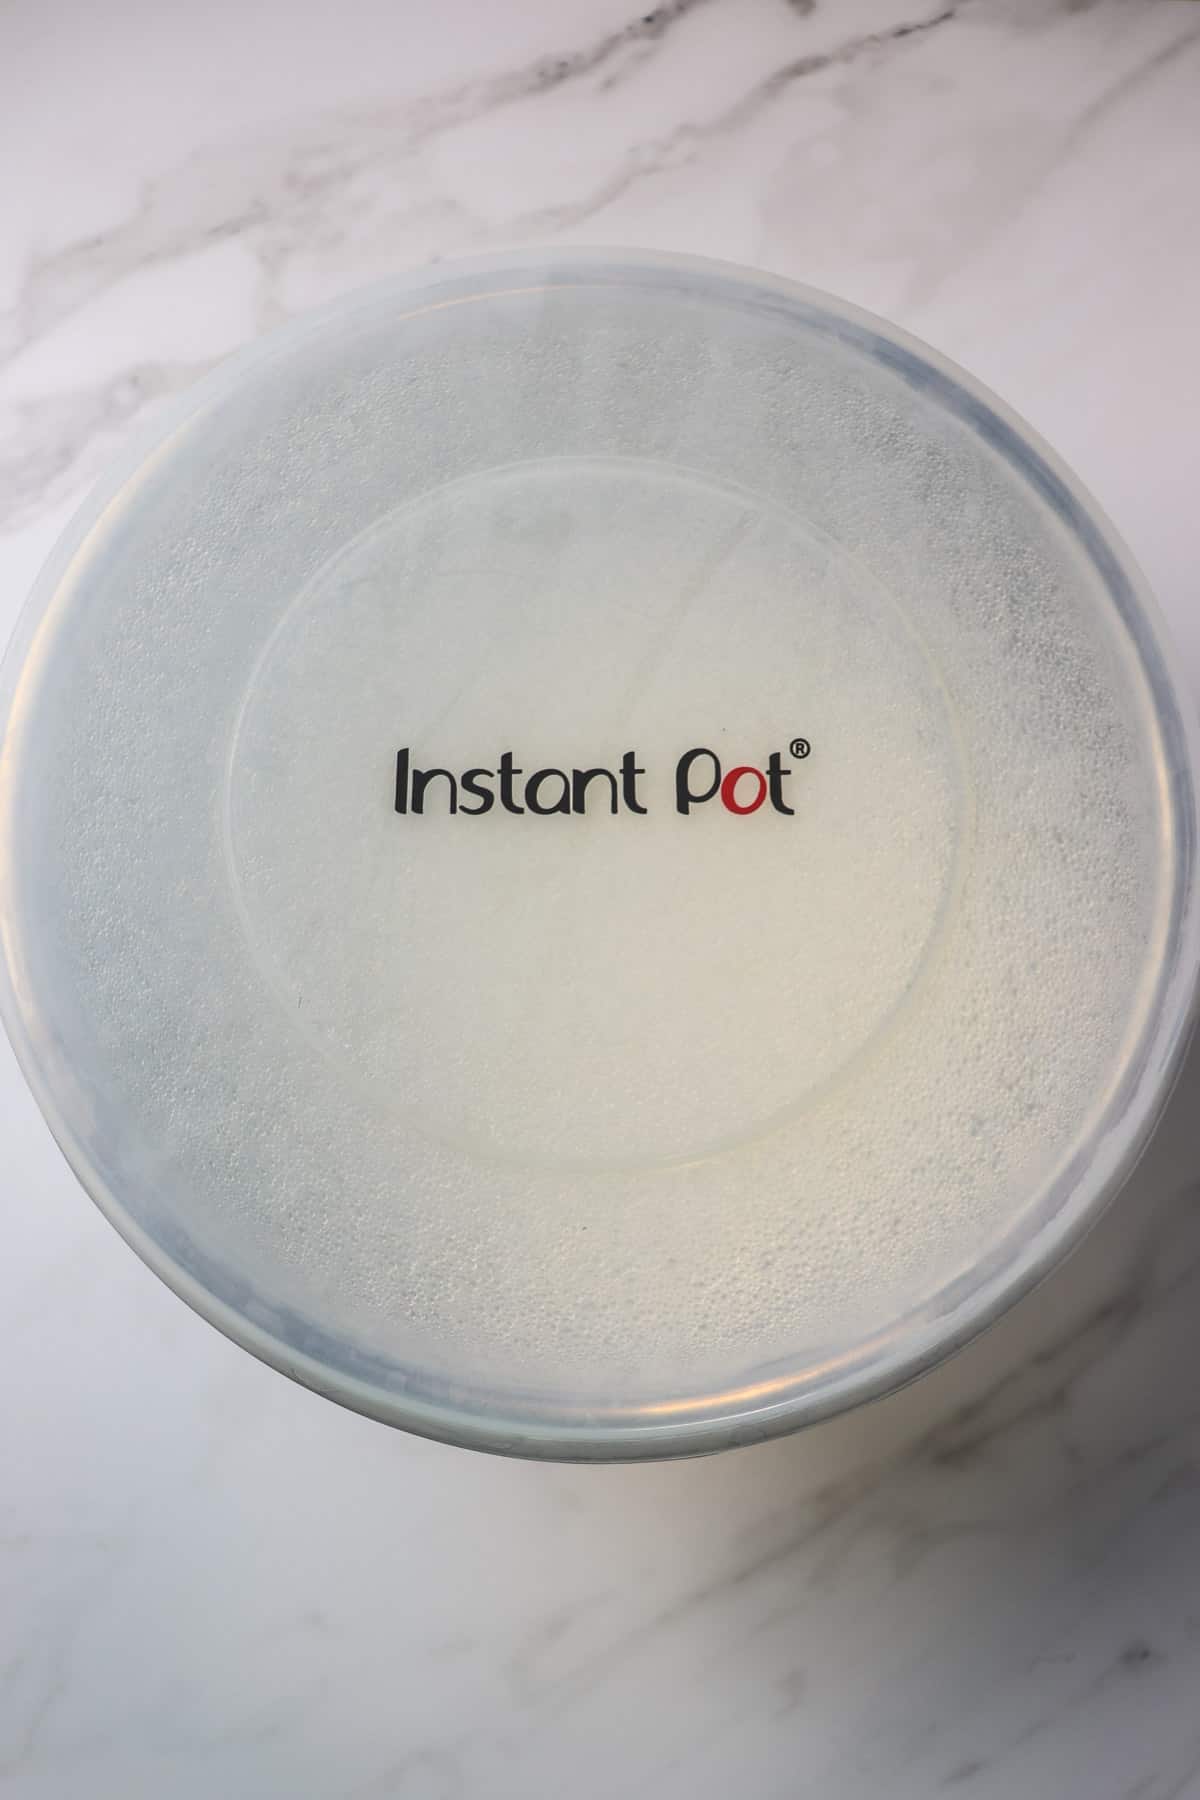 putting the lid on the instant pot liner